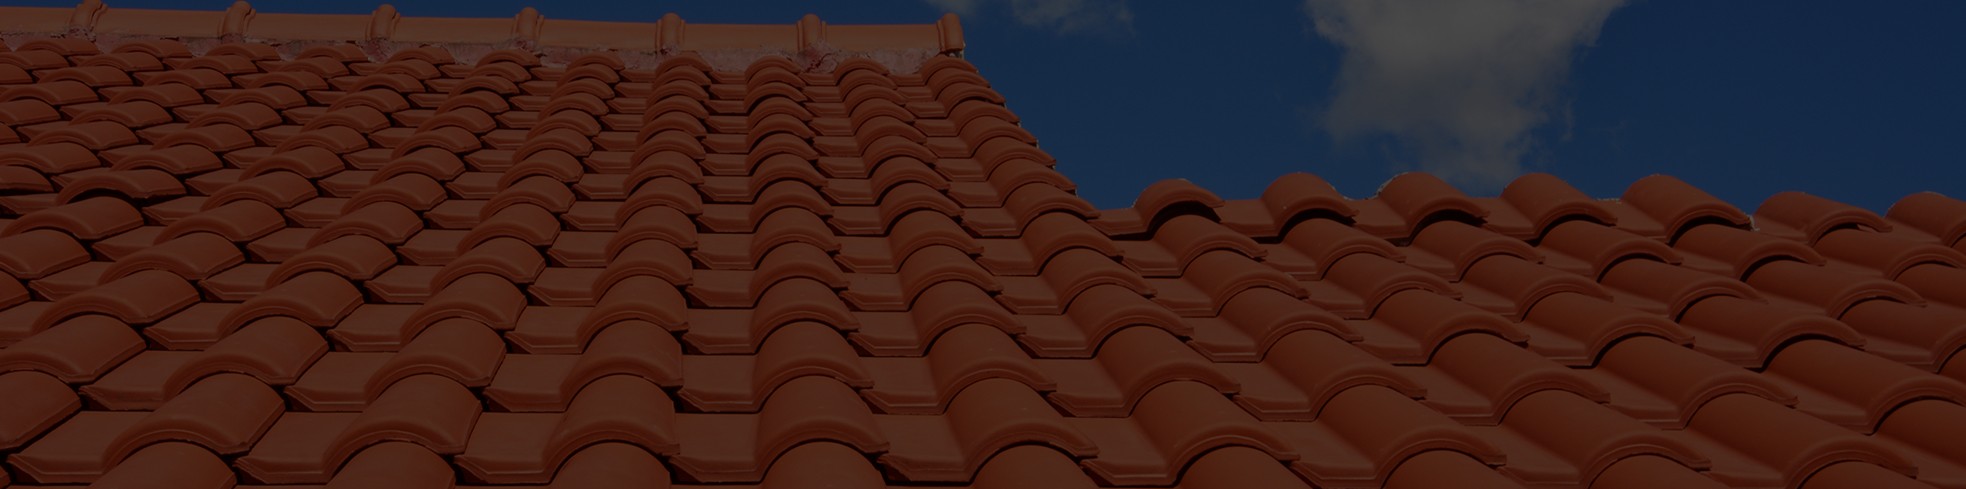 Tile Roofing Installation in Milwaukee 